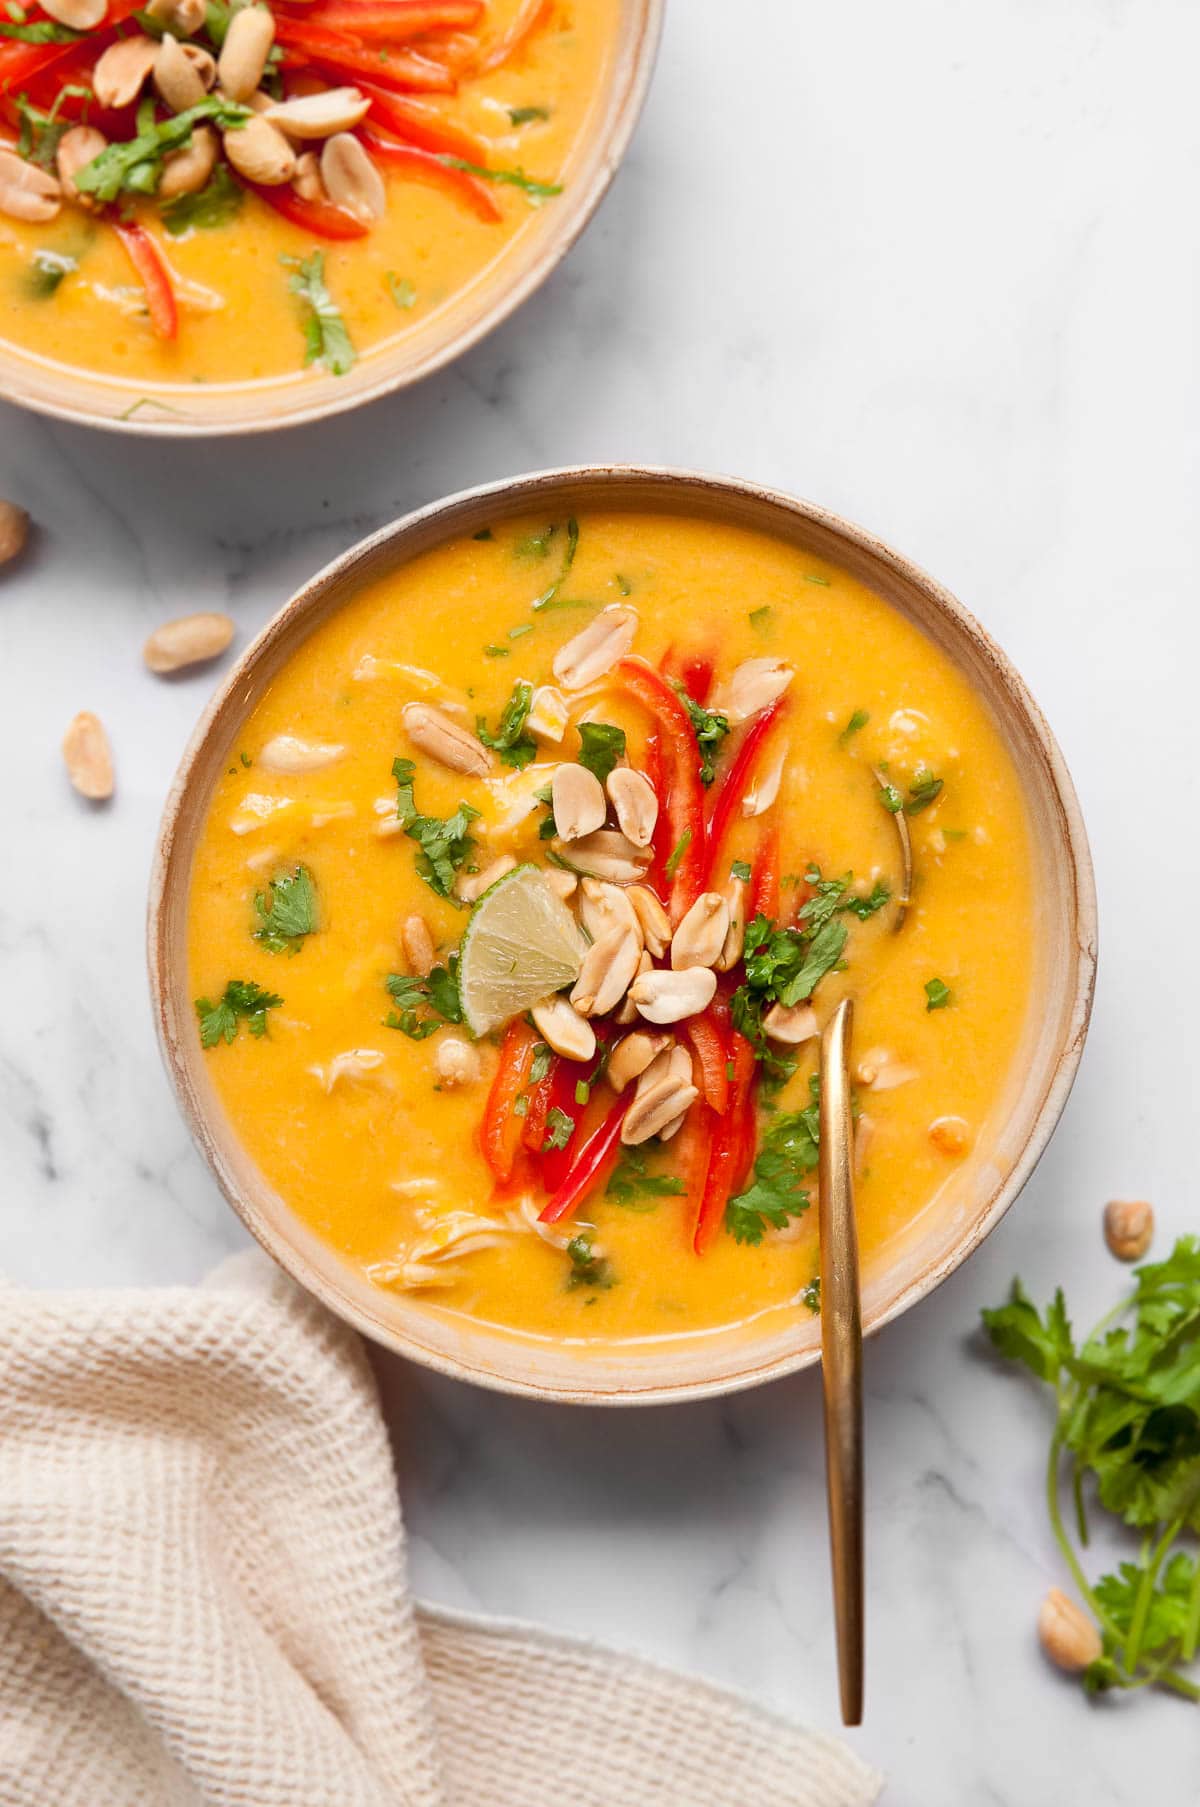 Butternut squash soup with chicken, red peppers, peanuts, lime, and cilantro in a bowl with a spoon.